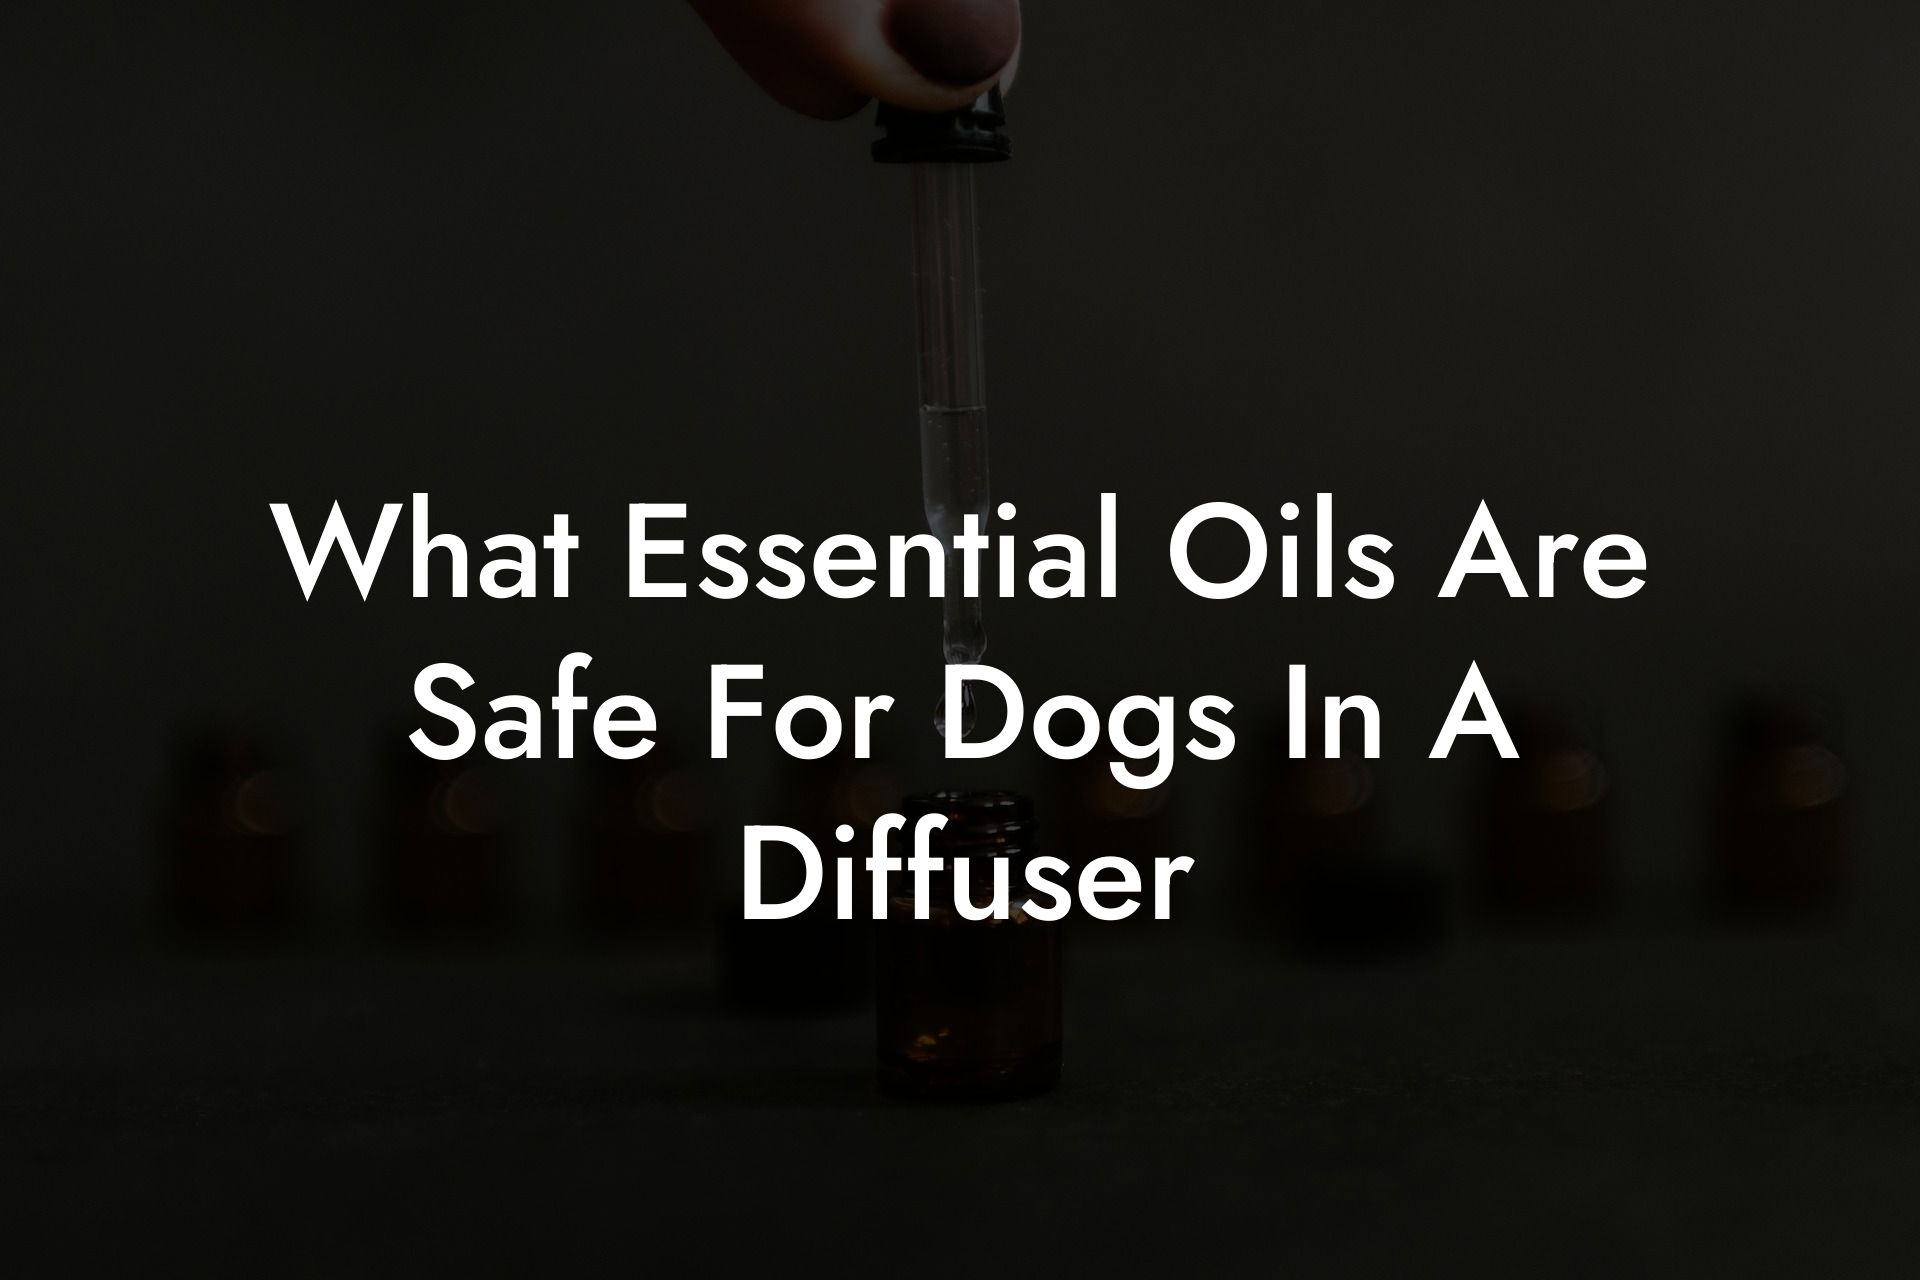 What Essential Oils Are Safe For Dogs In A Diffuser